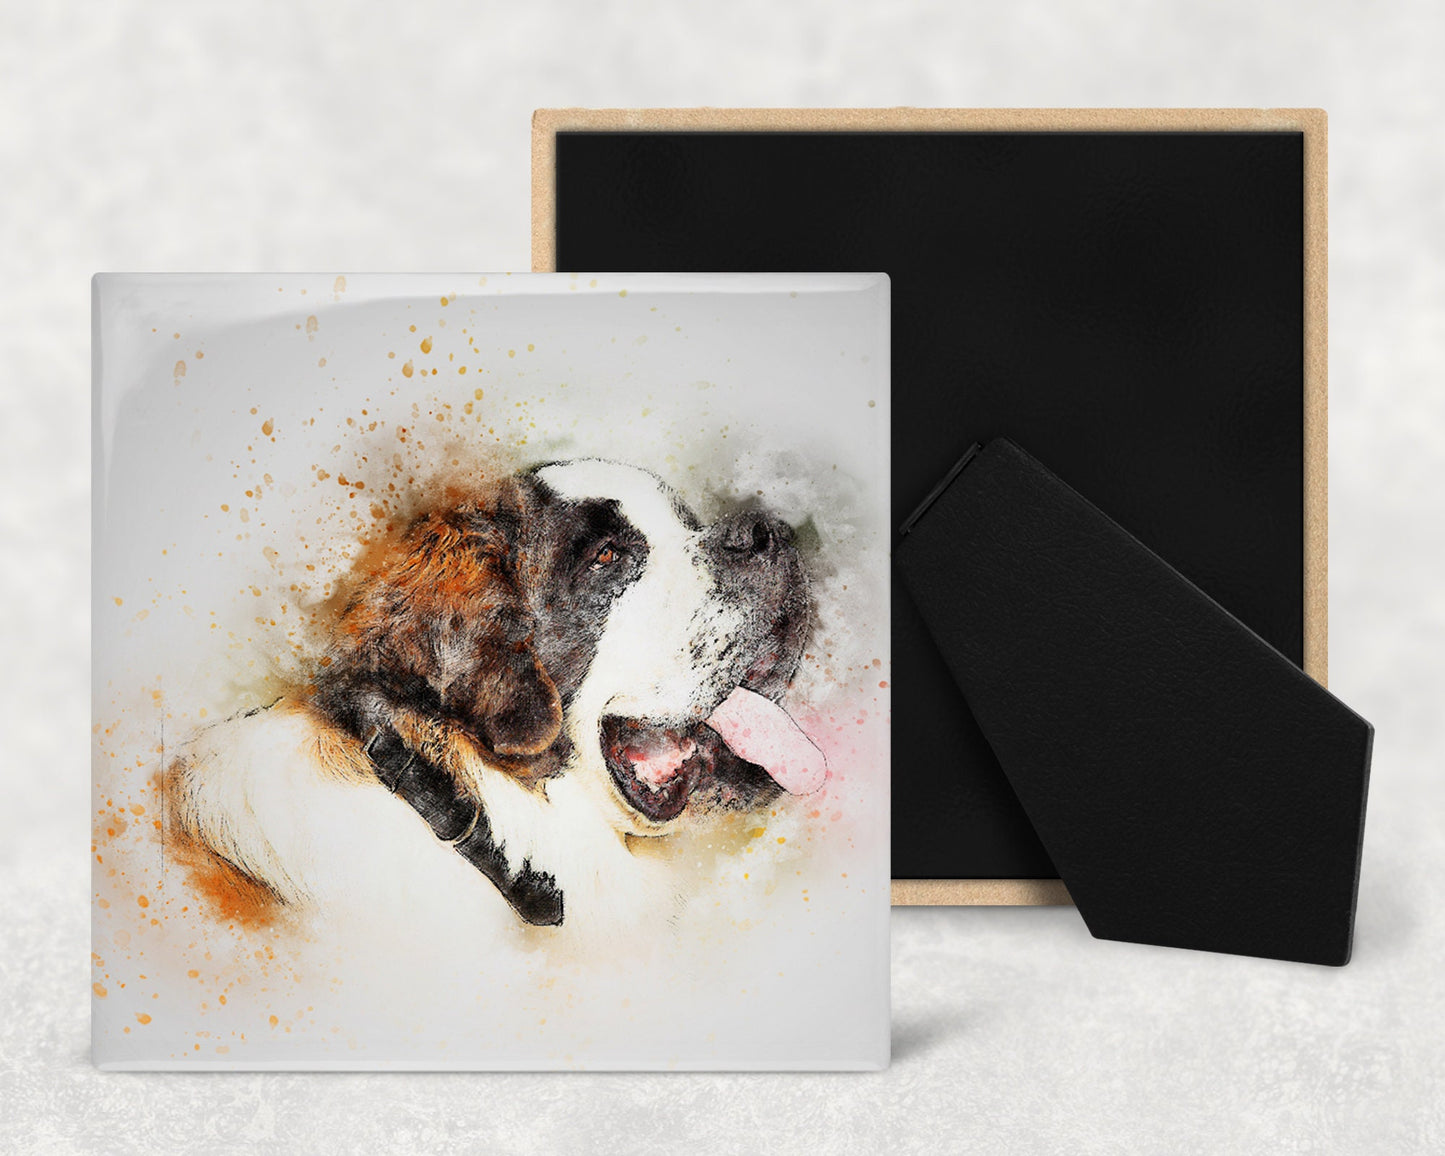 Watercolor St Bernard Art Decorative Ceramic Tile with Optional Easel Back - Available in 3 Sizes